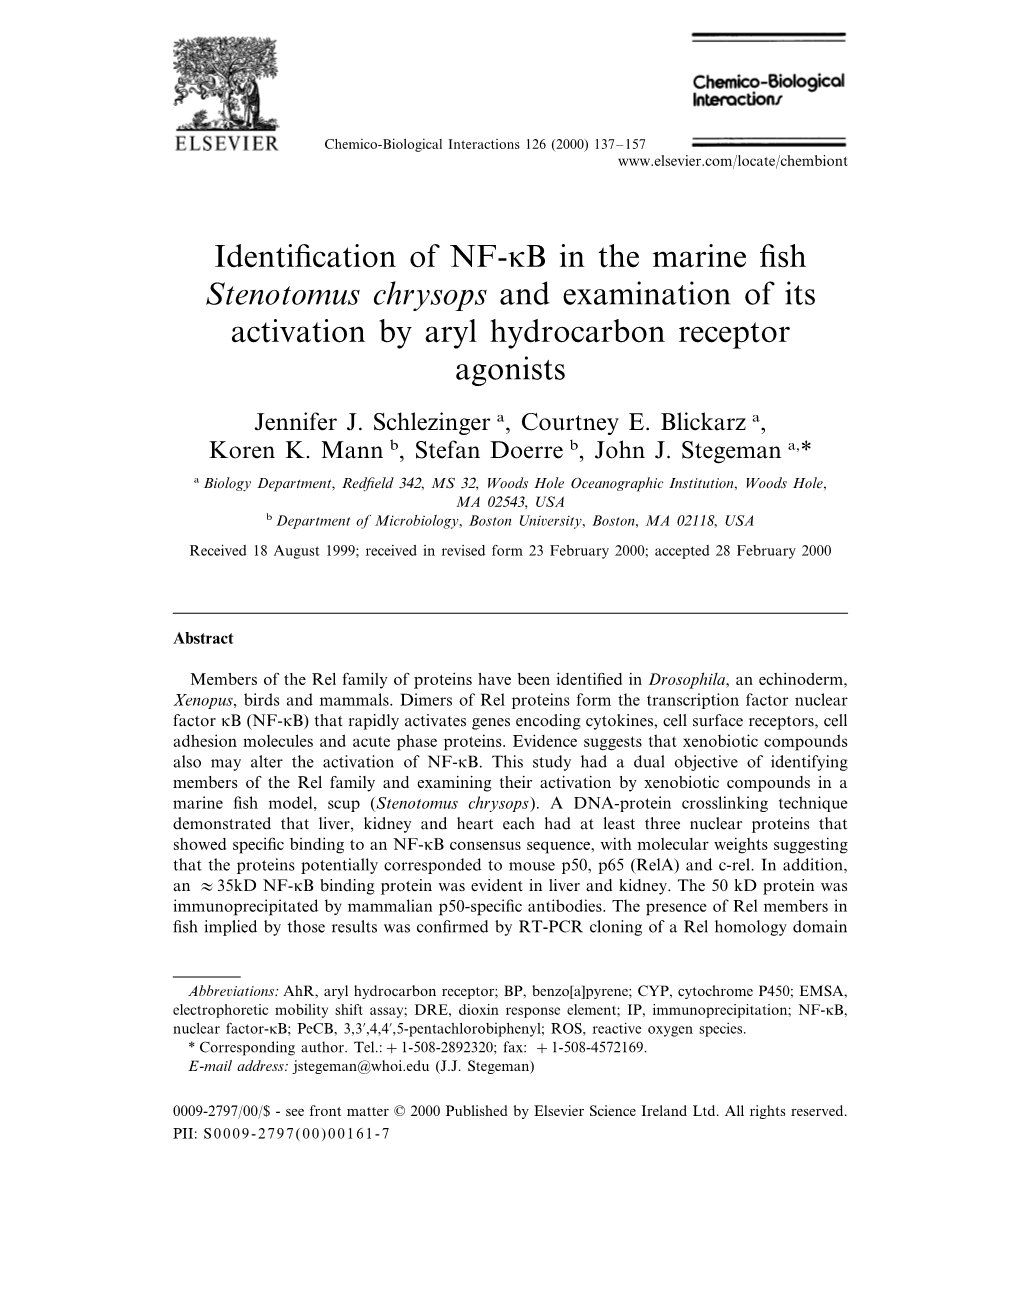 Identification of NF-Kb in the Marine Fish Stenotomus Chrysops And